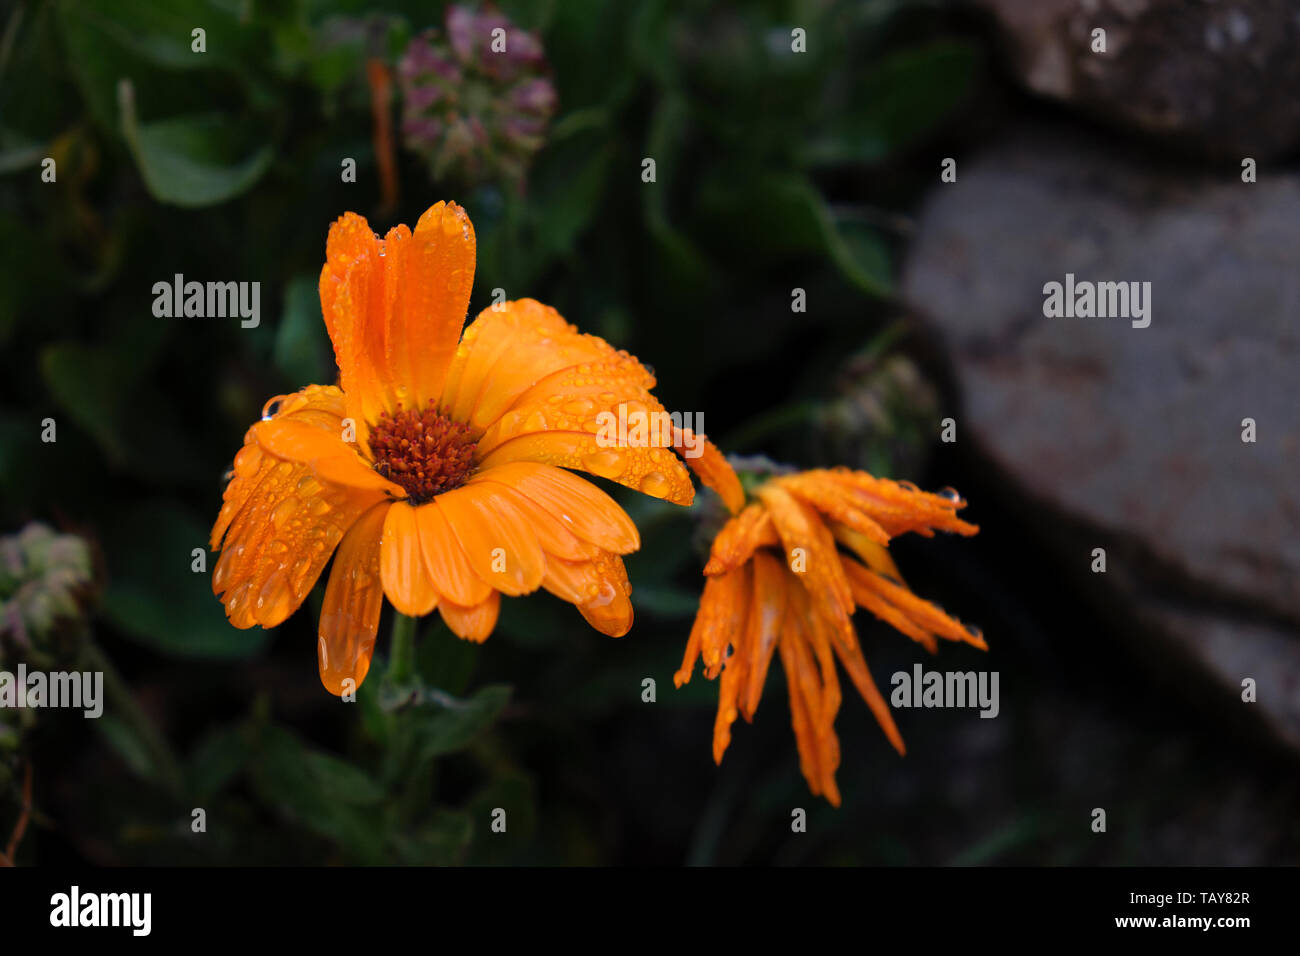 A drooping marigold flower after a strong rain shower. Stock Photo